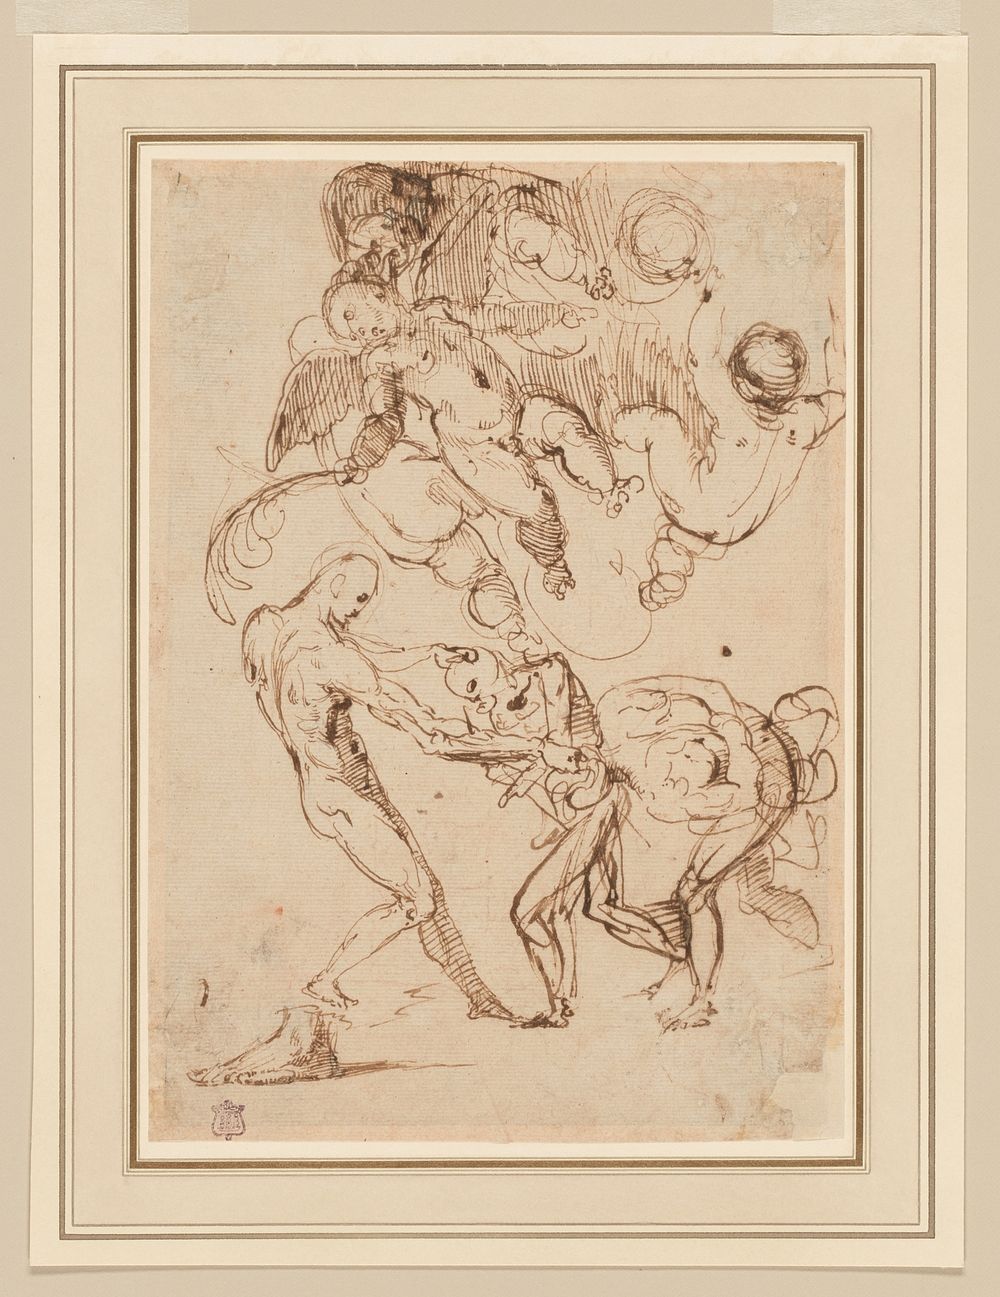 A Study of Bound Male Figures being Manhandled, and Various Putti, One Holding a Palm Frond by Italian School